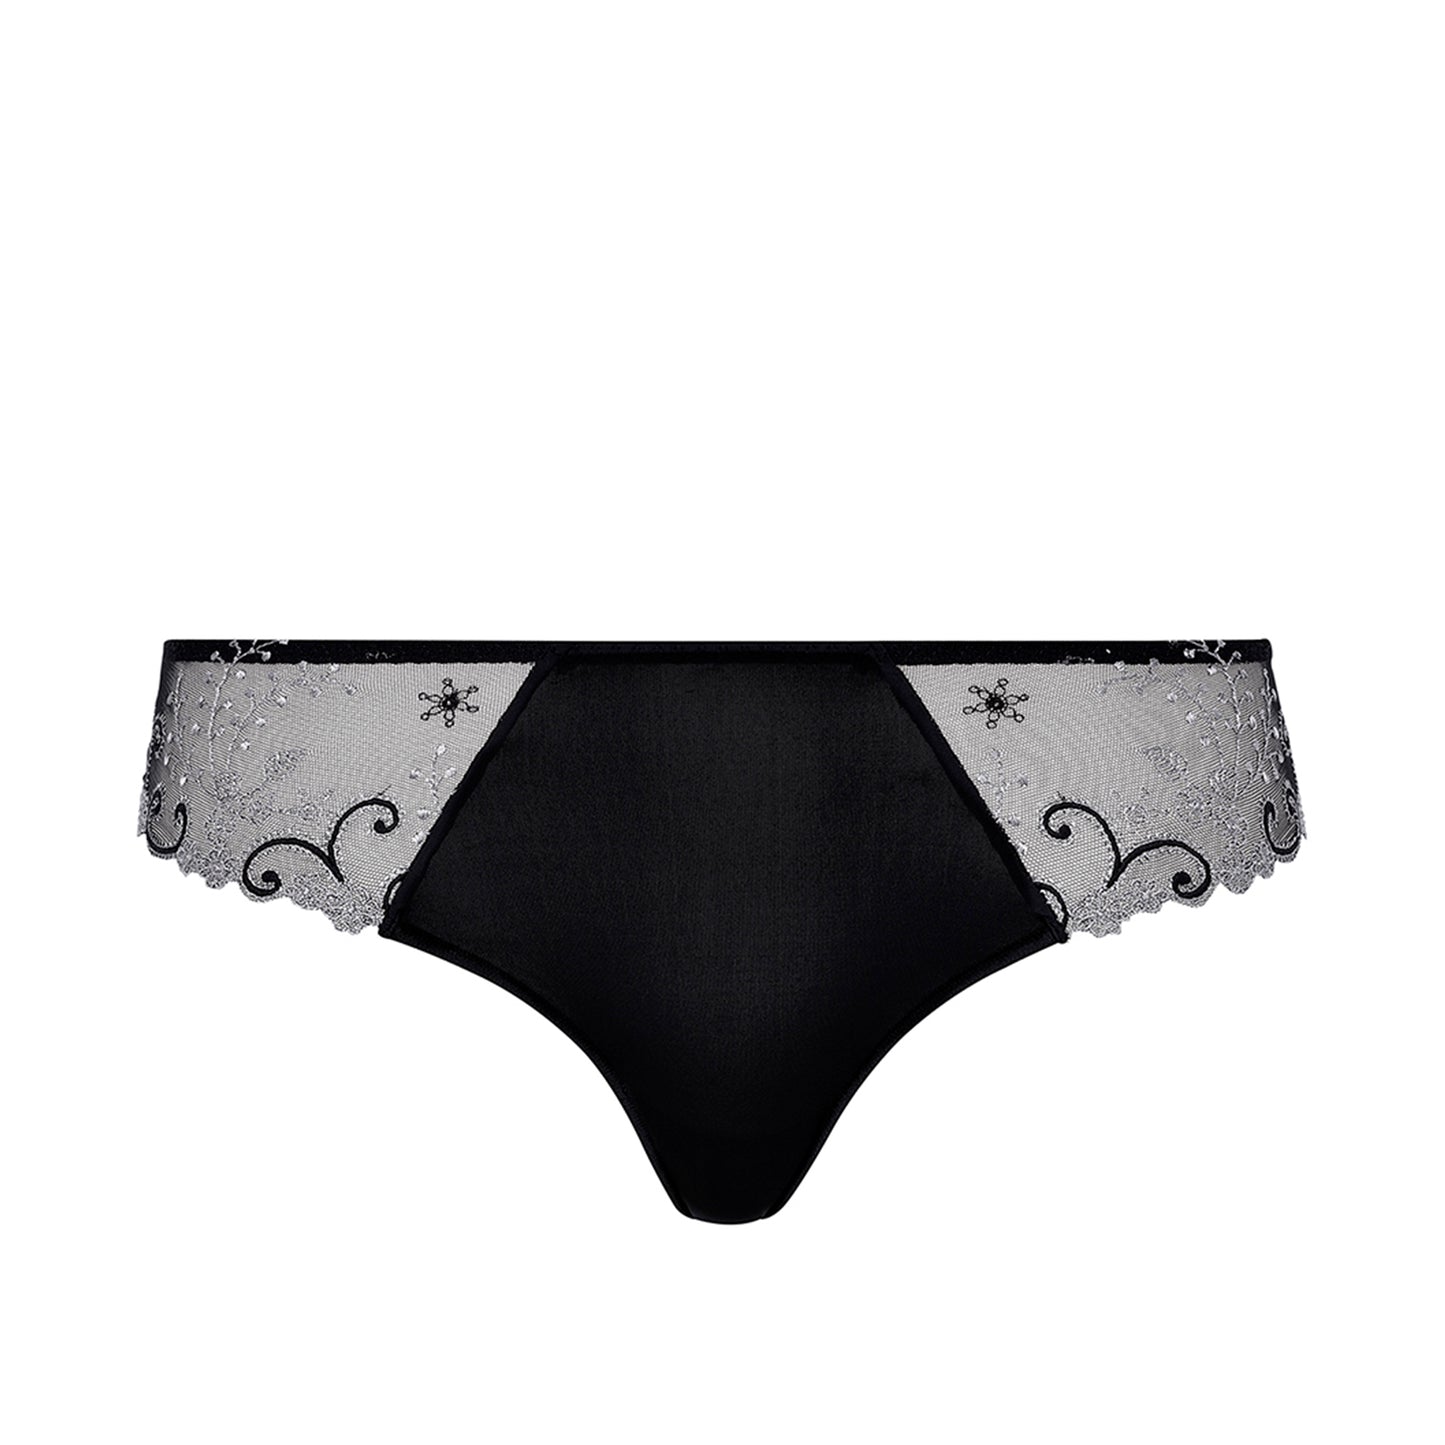 Delice thong